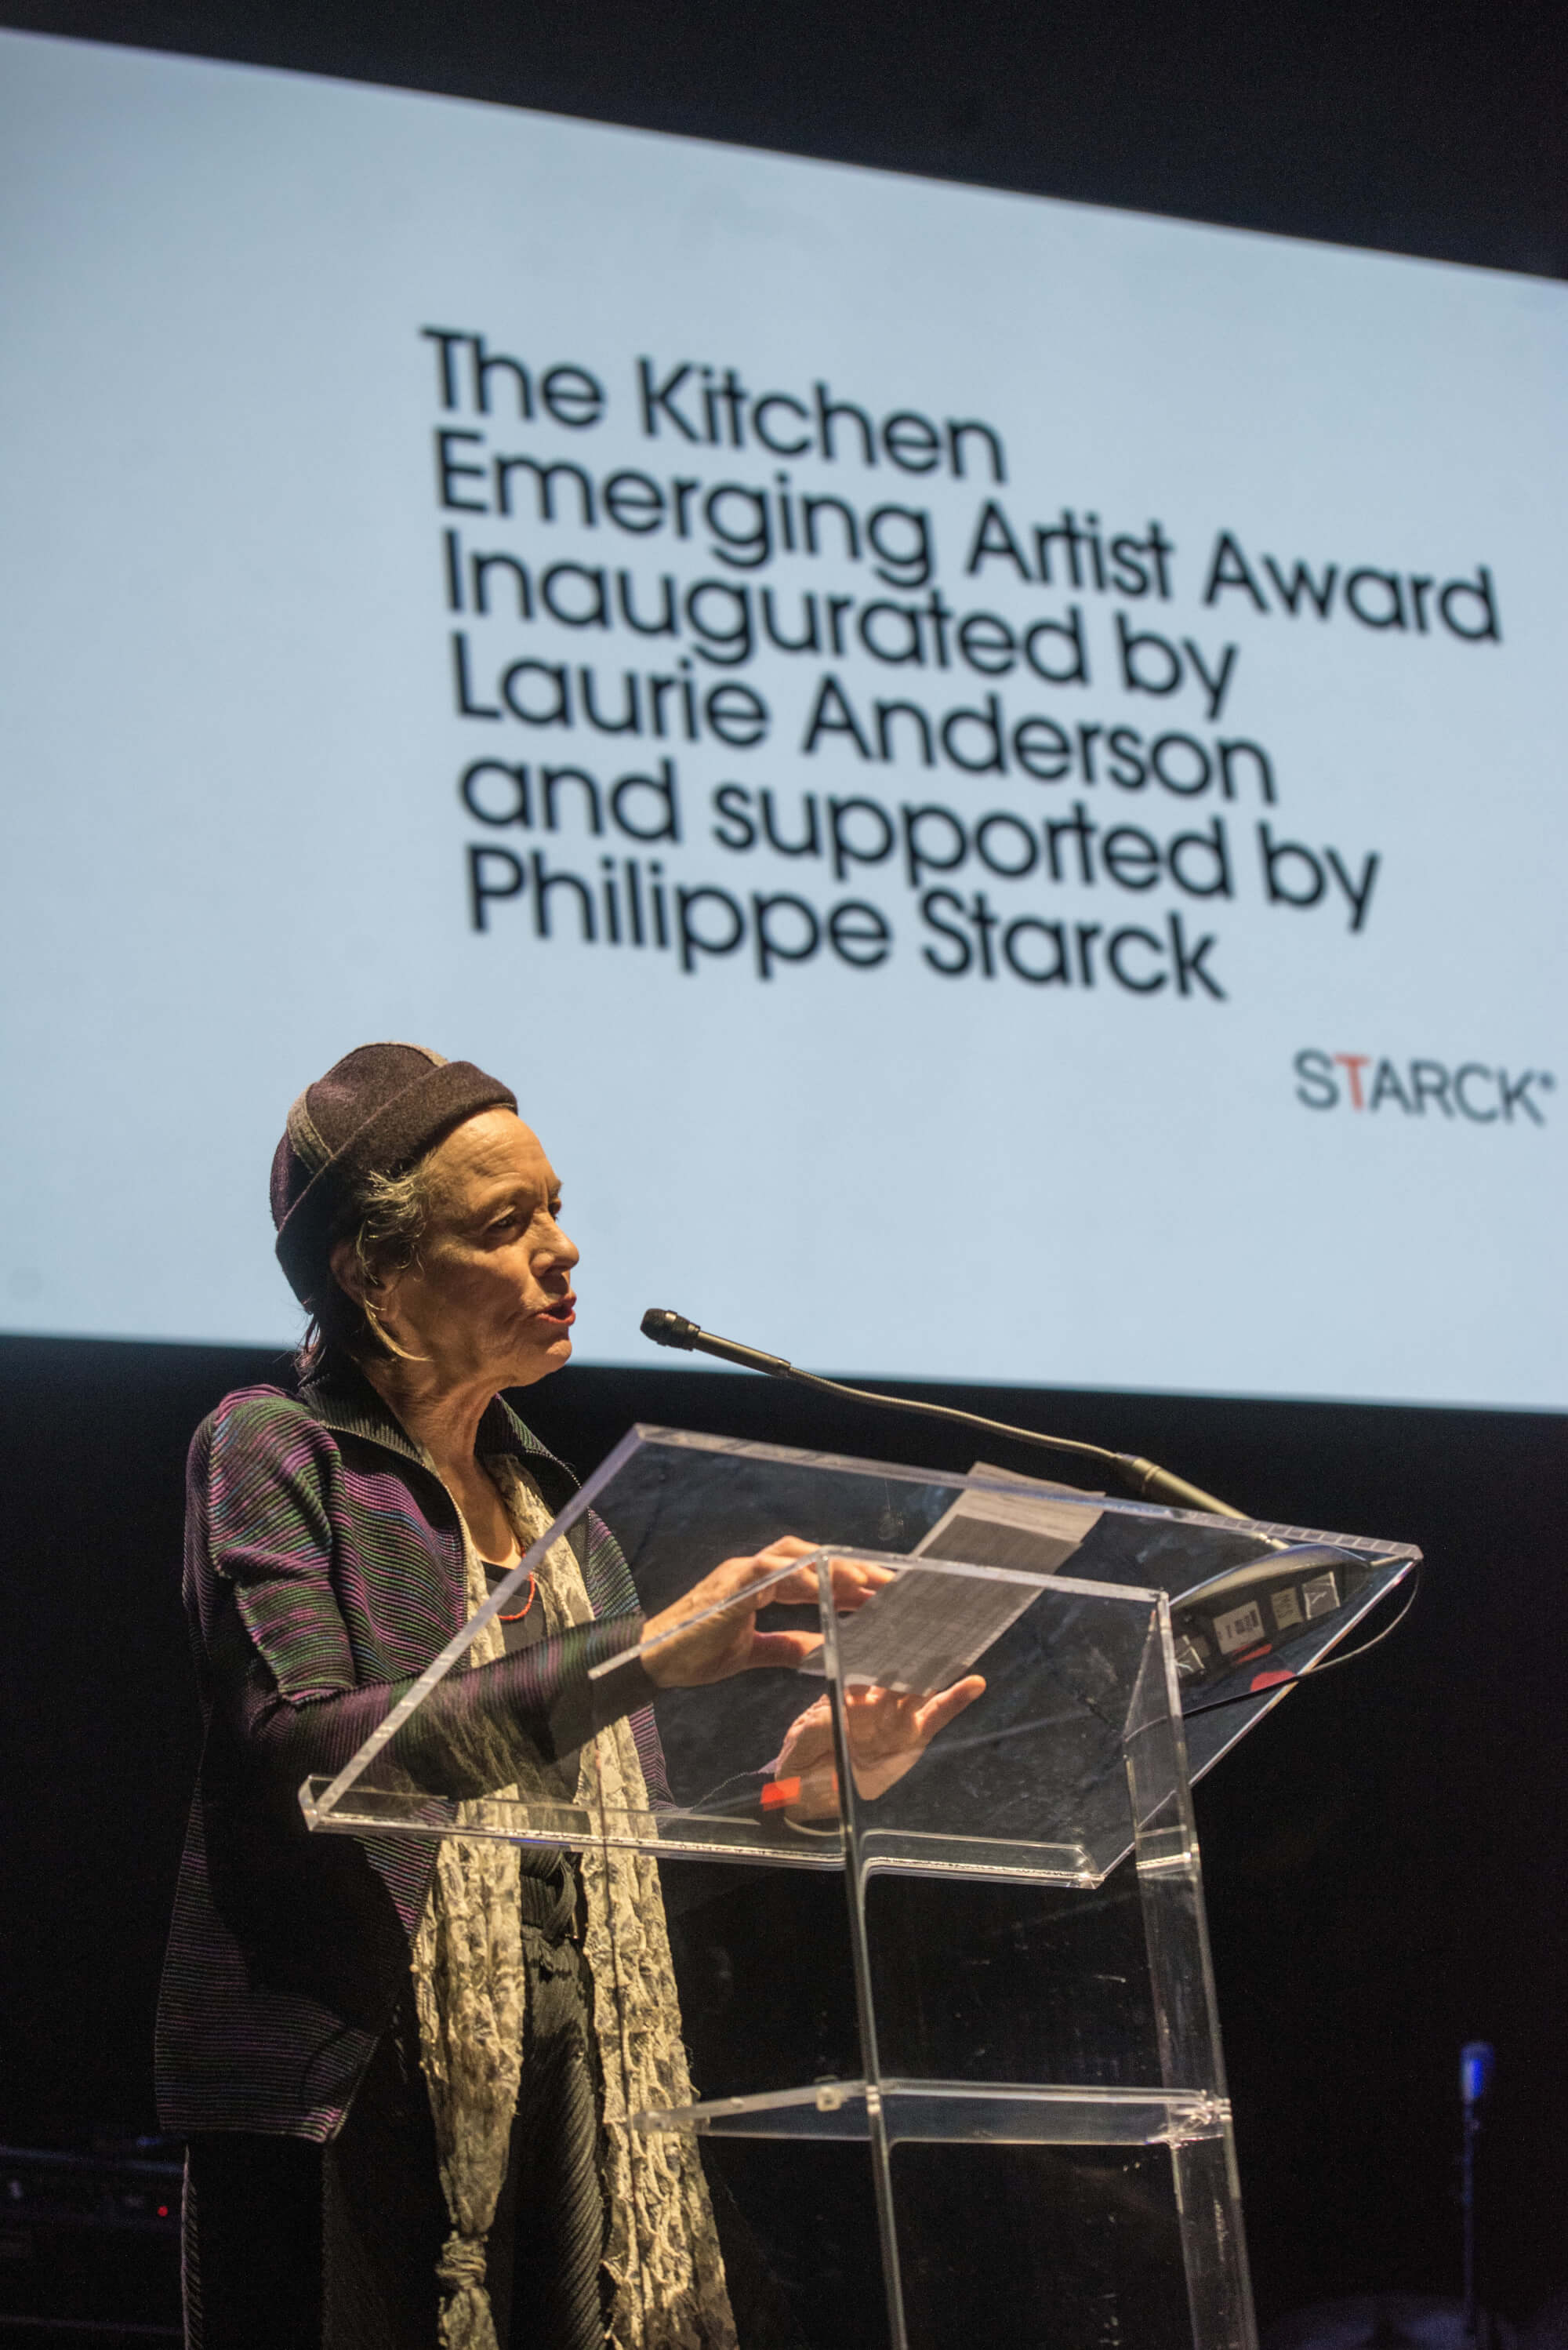 Starck supports the first The Kitchen Emerging Artist Award inaugurated by artist Laurie Anderson